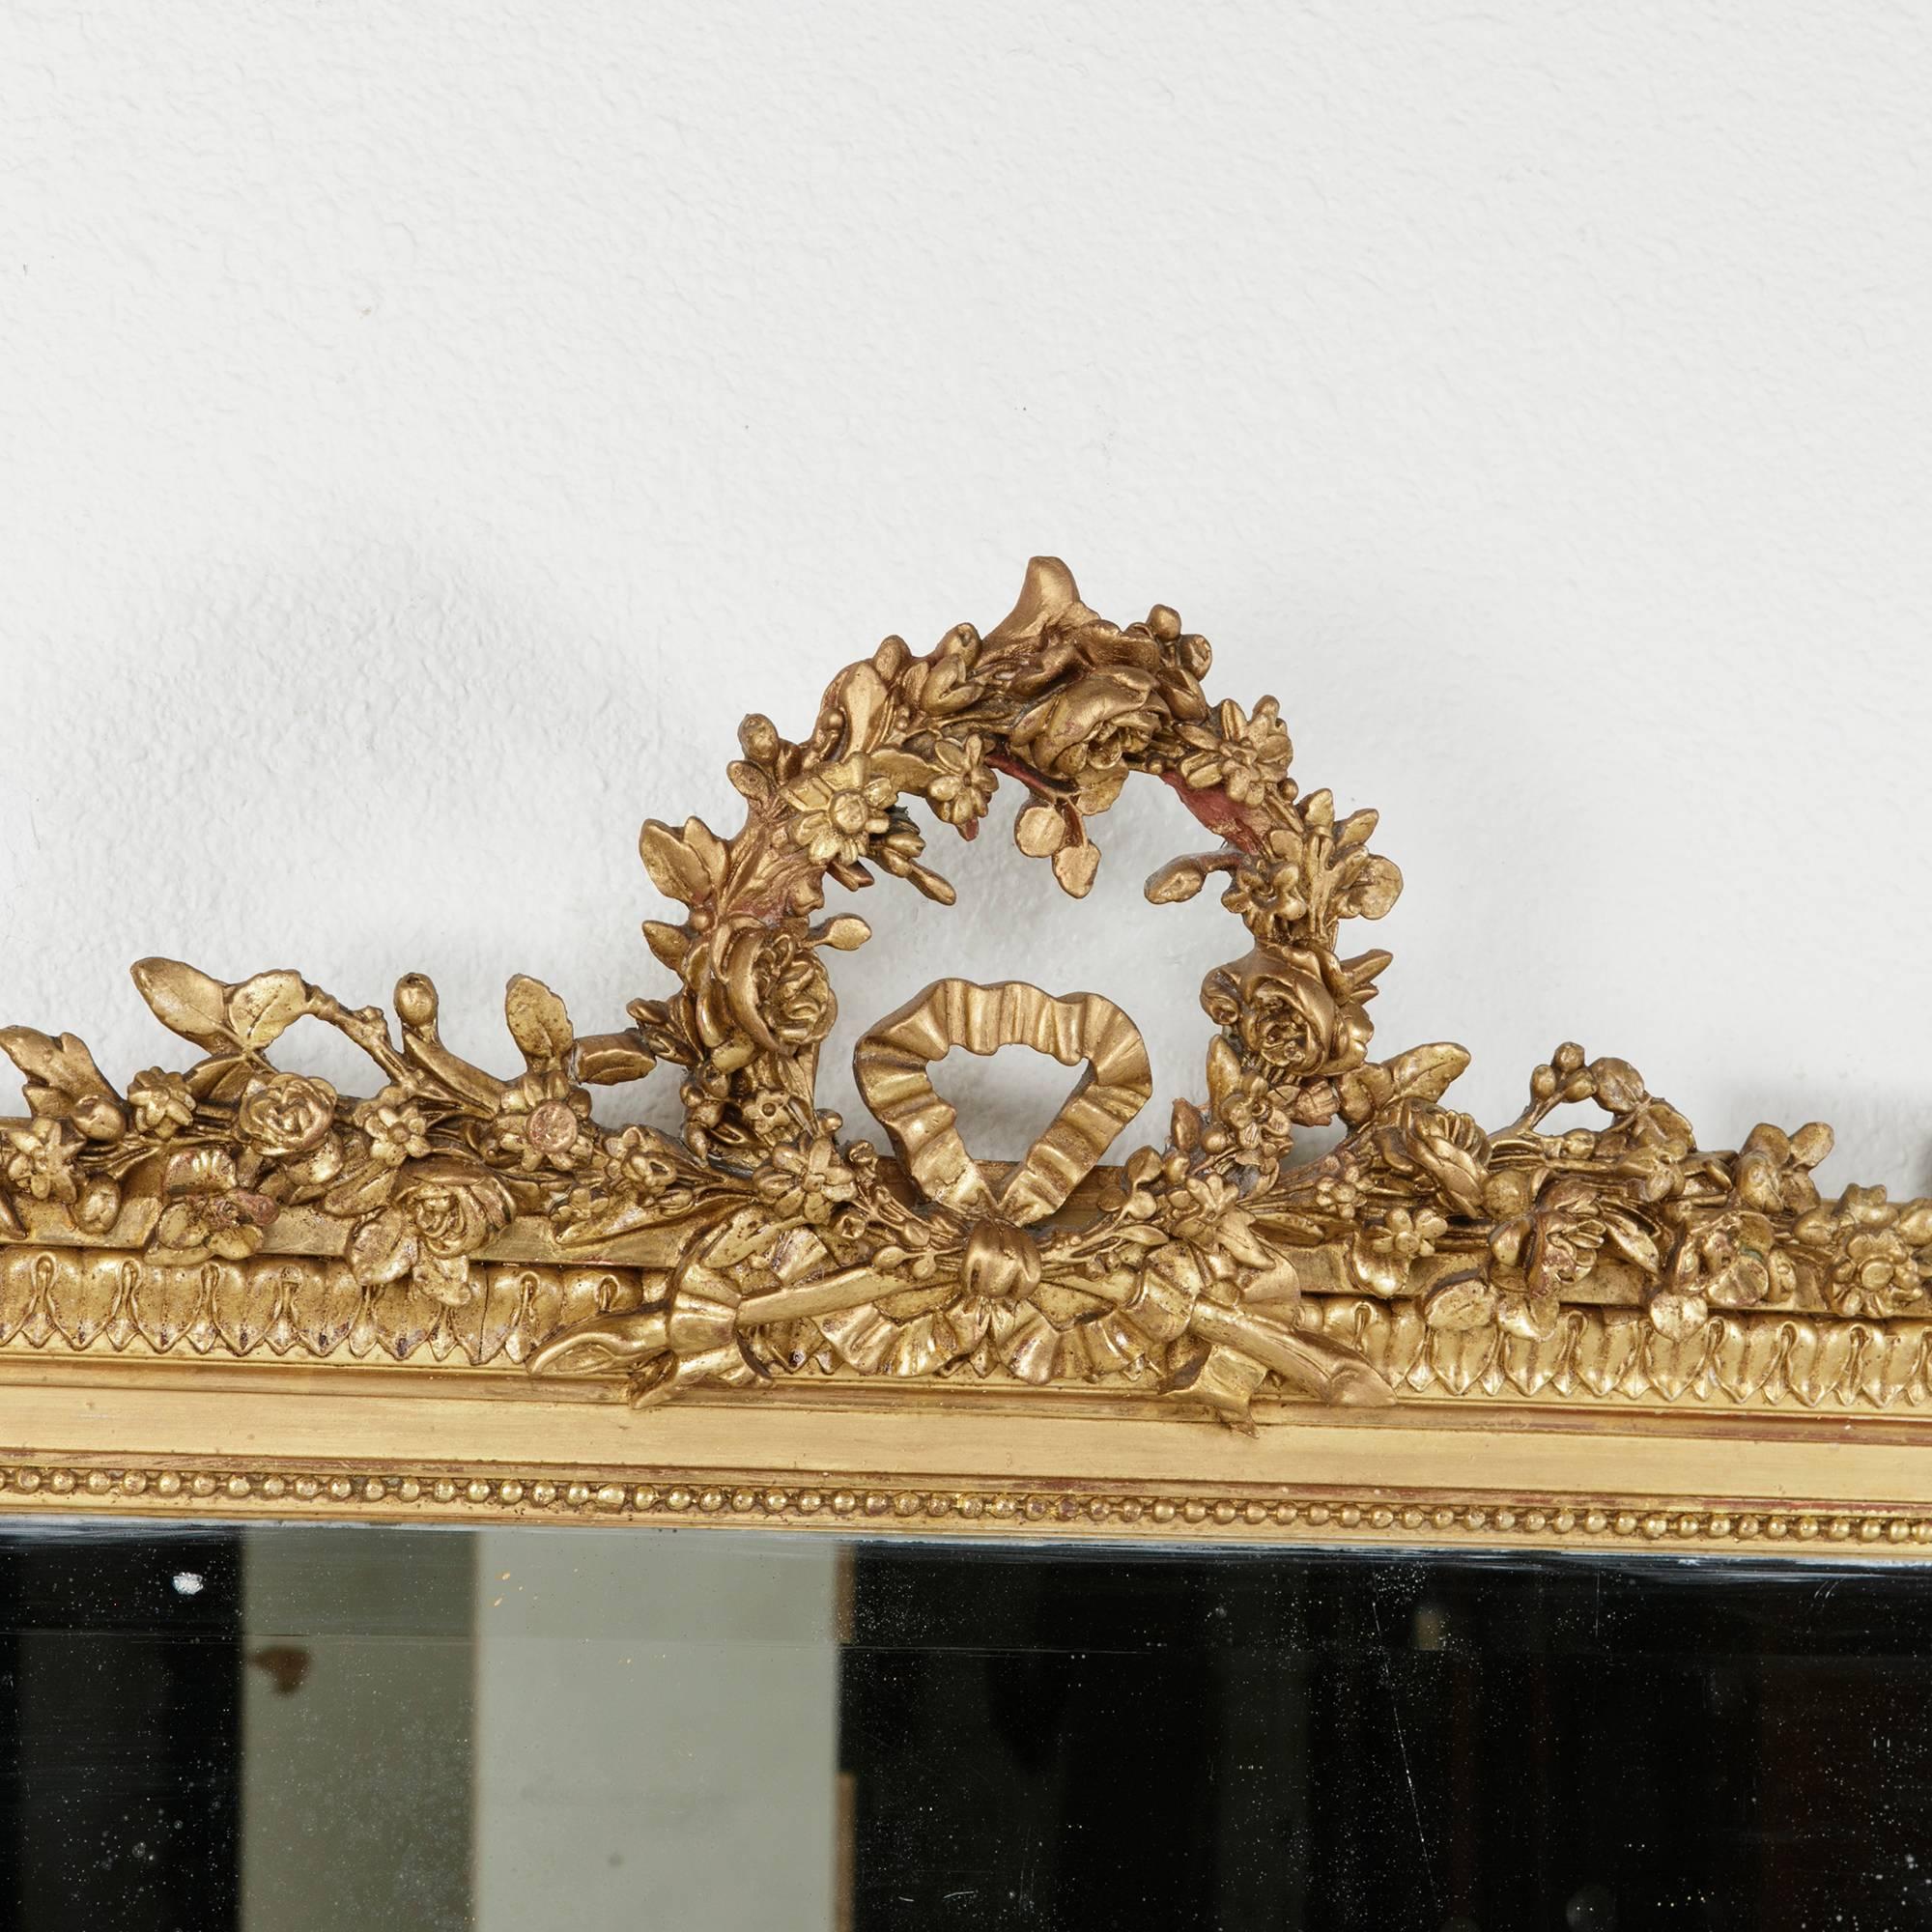 This exquisite 19th century hand-carved giltwood mirror is a quintessential example of the Louis XVI style. Its frame features classic Louis XVI motifs in its rows of finely carved leaves, beading, and corner rosettes. A delicately hand-carved